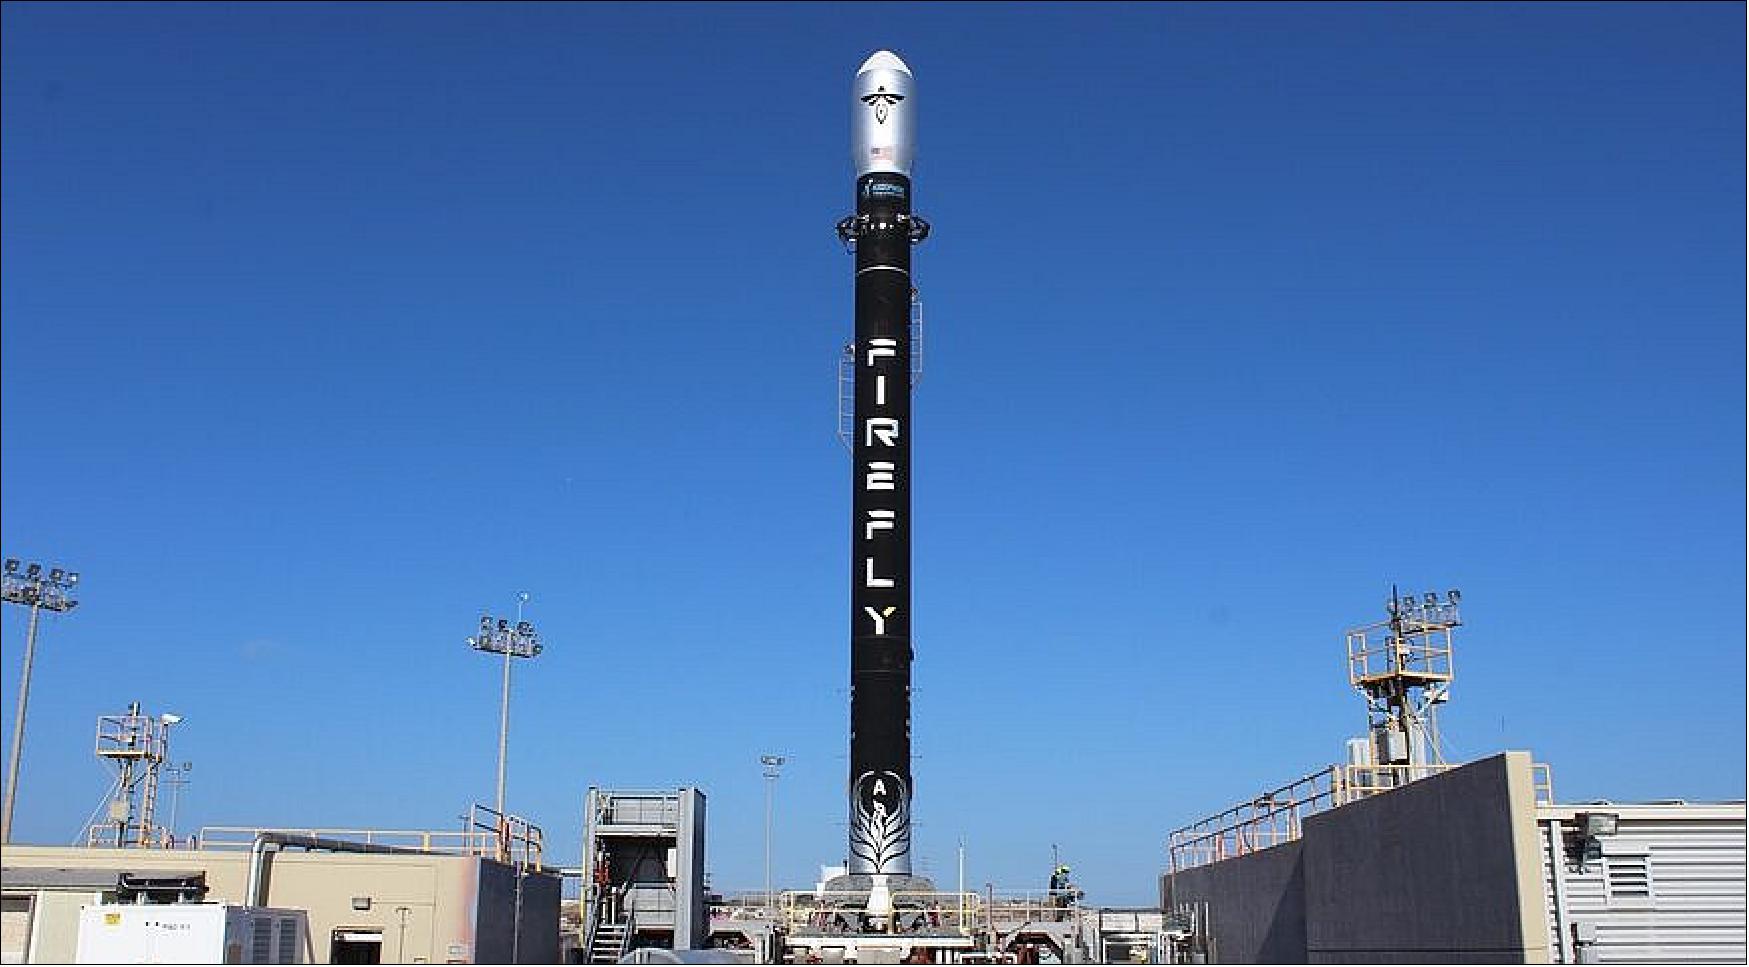 Figure 2: Firefly STS will be responsible for government and commercial sales of its Alpha rocket as well as in-space transportation services and its Blue Ghost lunar lander (image credit: SpaceNews/Jeff Foust)